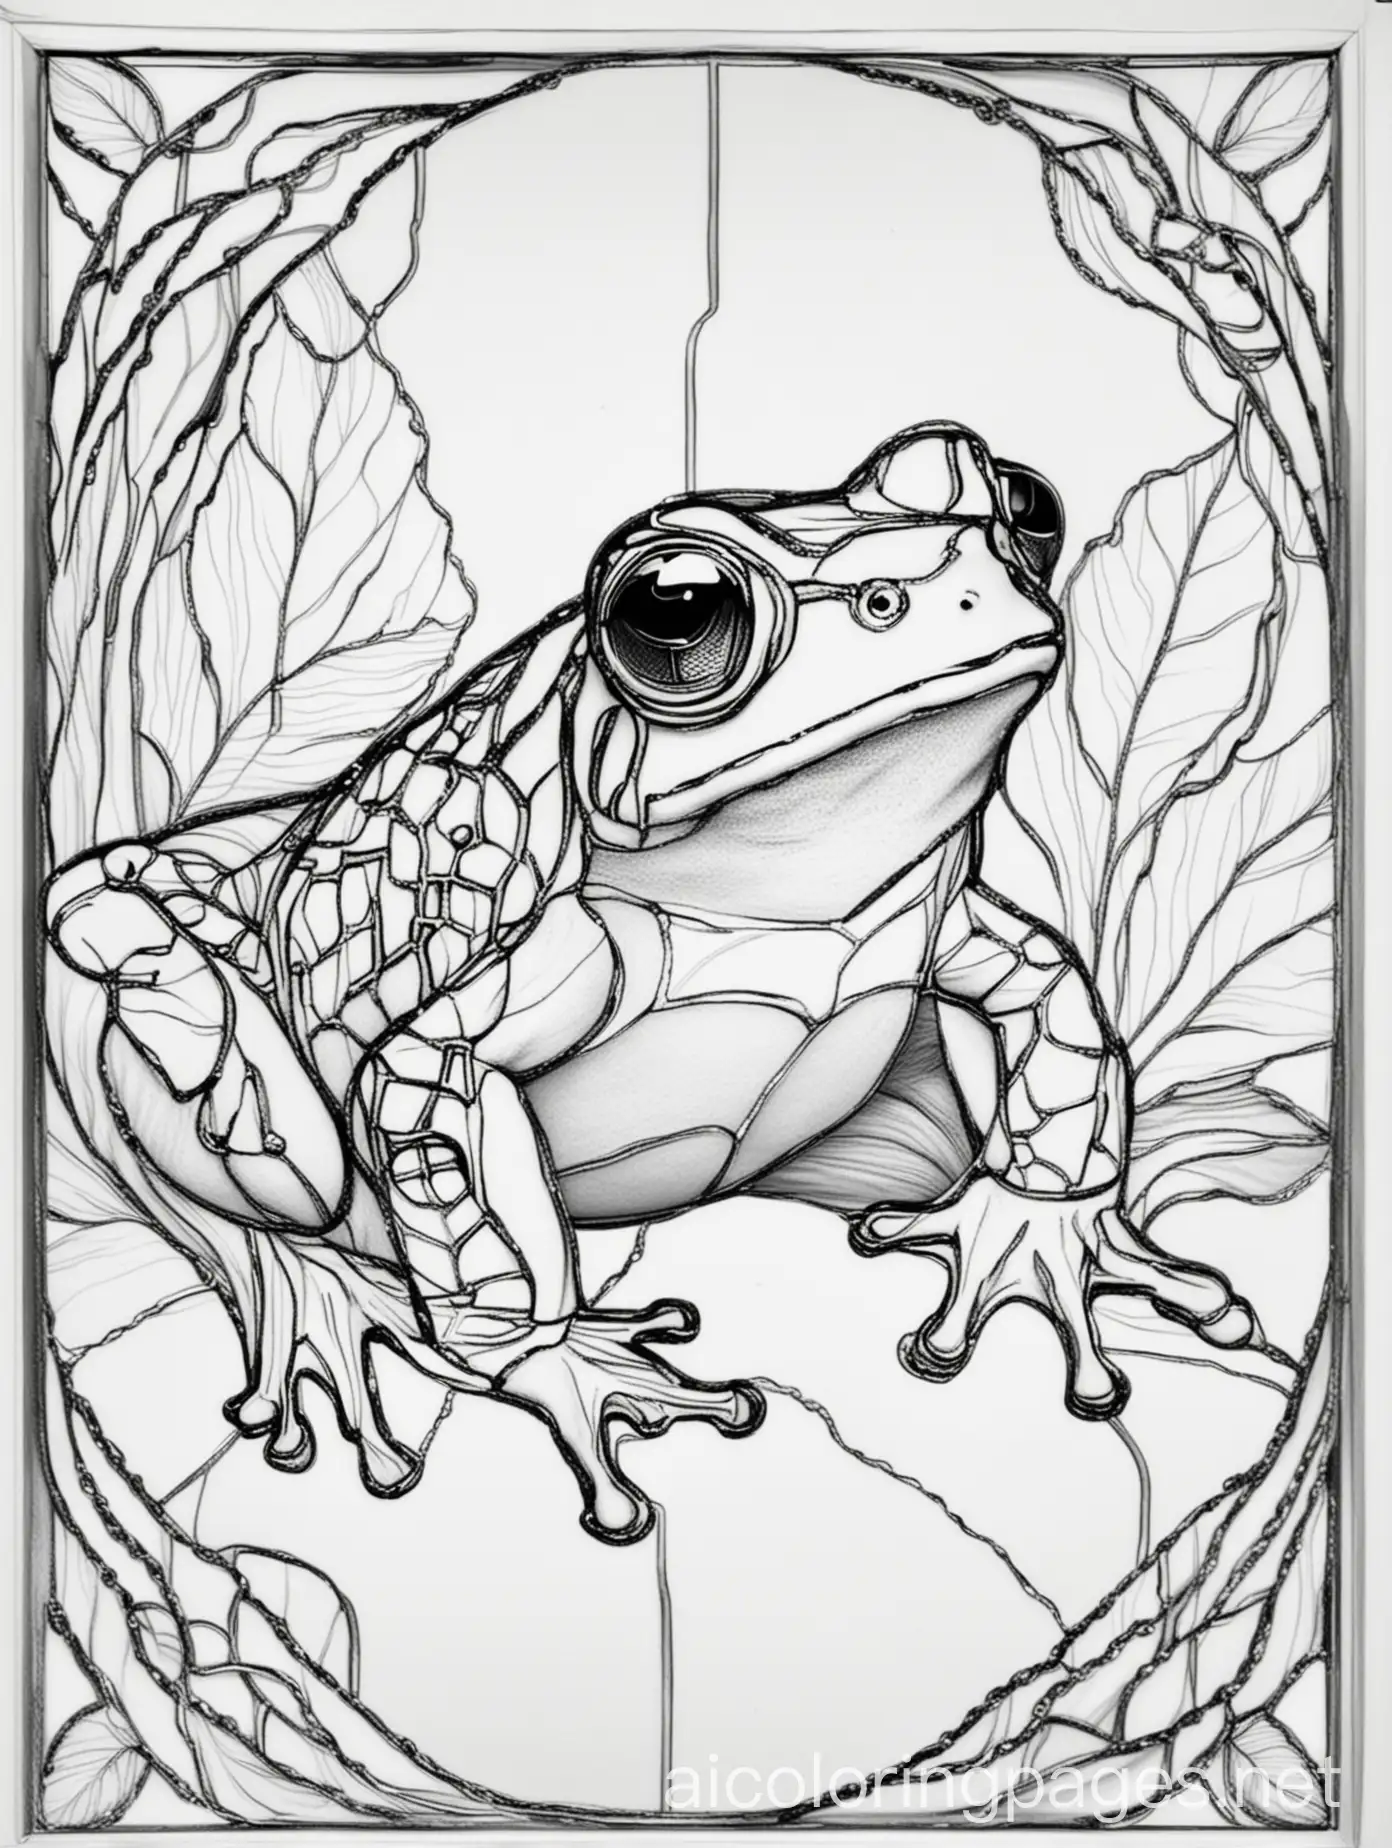 Stained-Glass-Frog-Coloring-Page-for-Adults-Detailed-Line-Art-on-White-Background